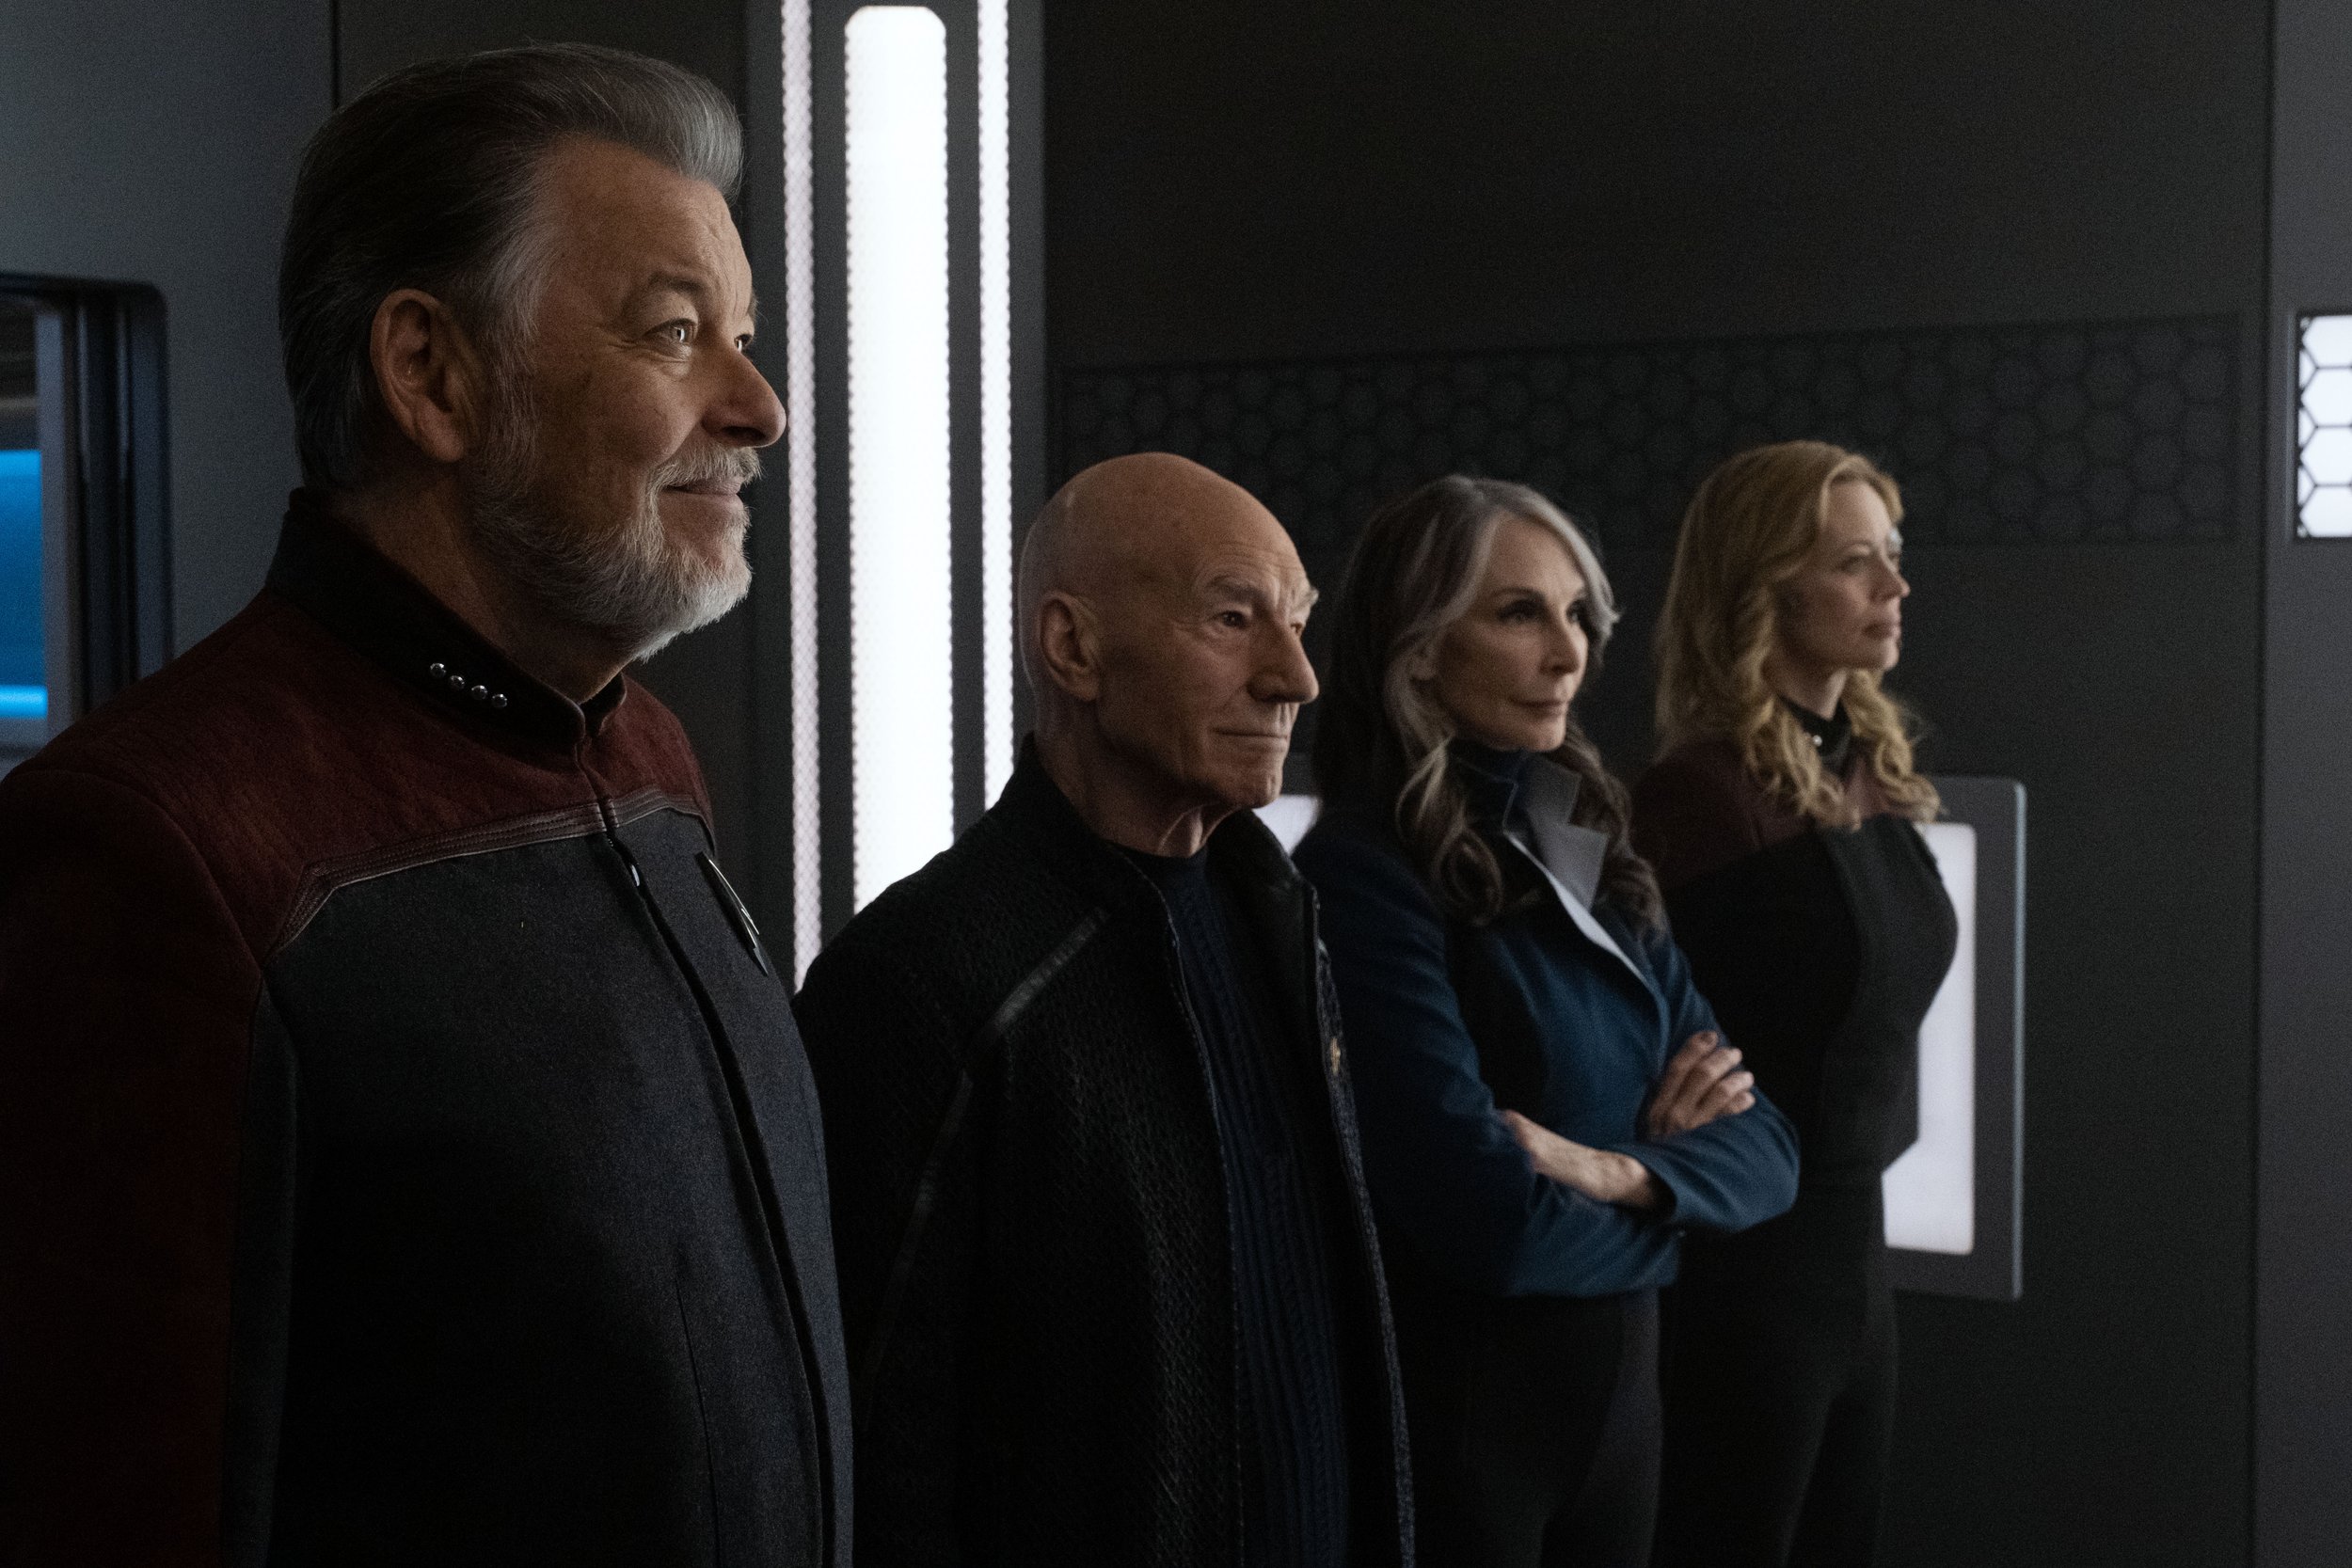   Jeri Ryan  as Seven of Nine,  Patrick Stewart  as Picard,  Gates McFadden  as Dr. Beverly Crusher and  Jonathan Frakes  as Will Riker.  Photo Credit: Trae Patton/Paramount+.  